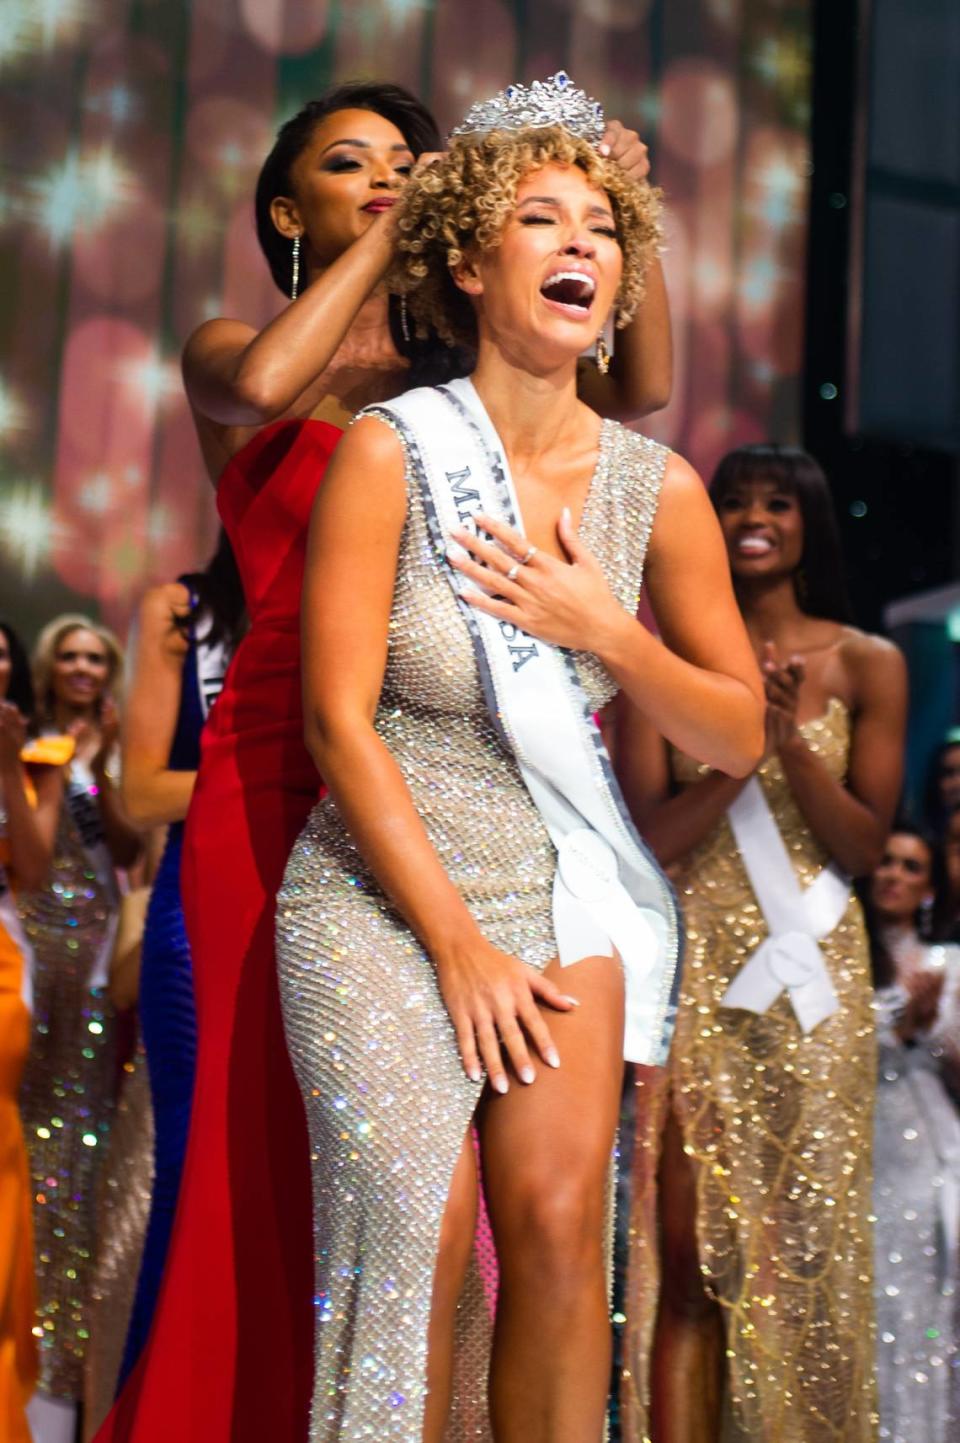 University of Kentucky graduate Elle Smith was crowned Miss USA. She’ll compete next in the Miss Universe pageant.